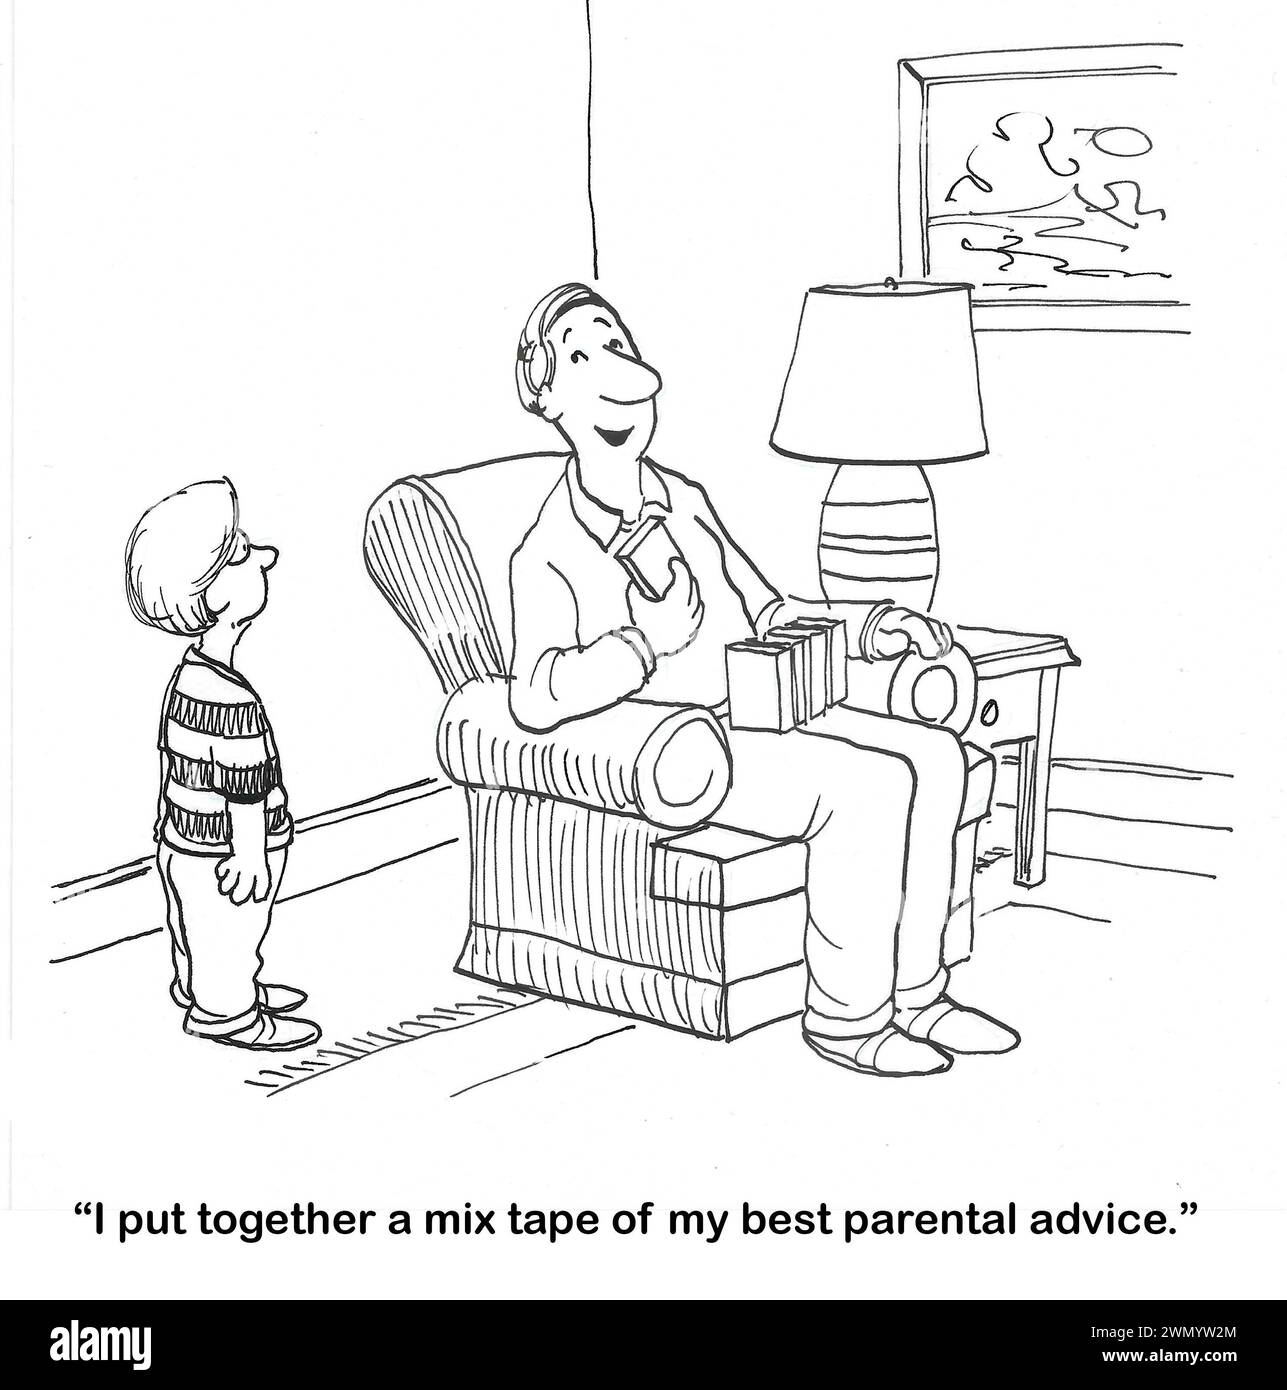 BW cartoon of a father handing his son a mix tape of his 'best parental advice'. Stock Photo